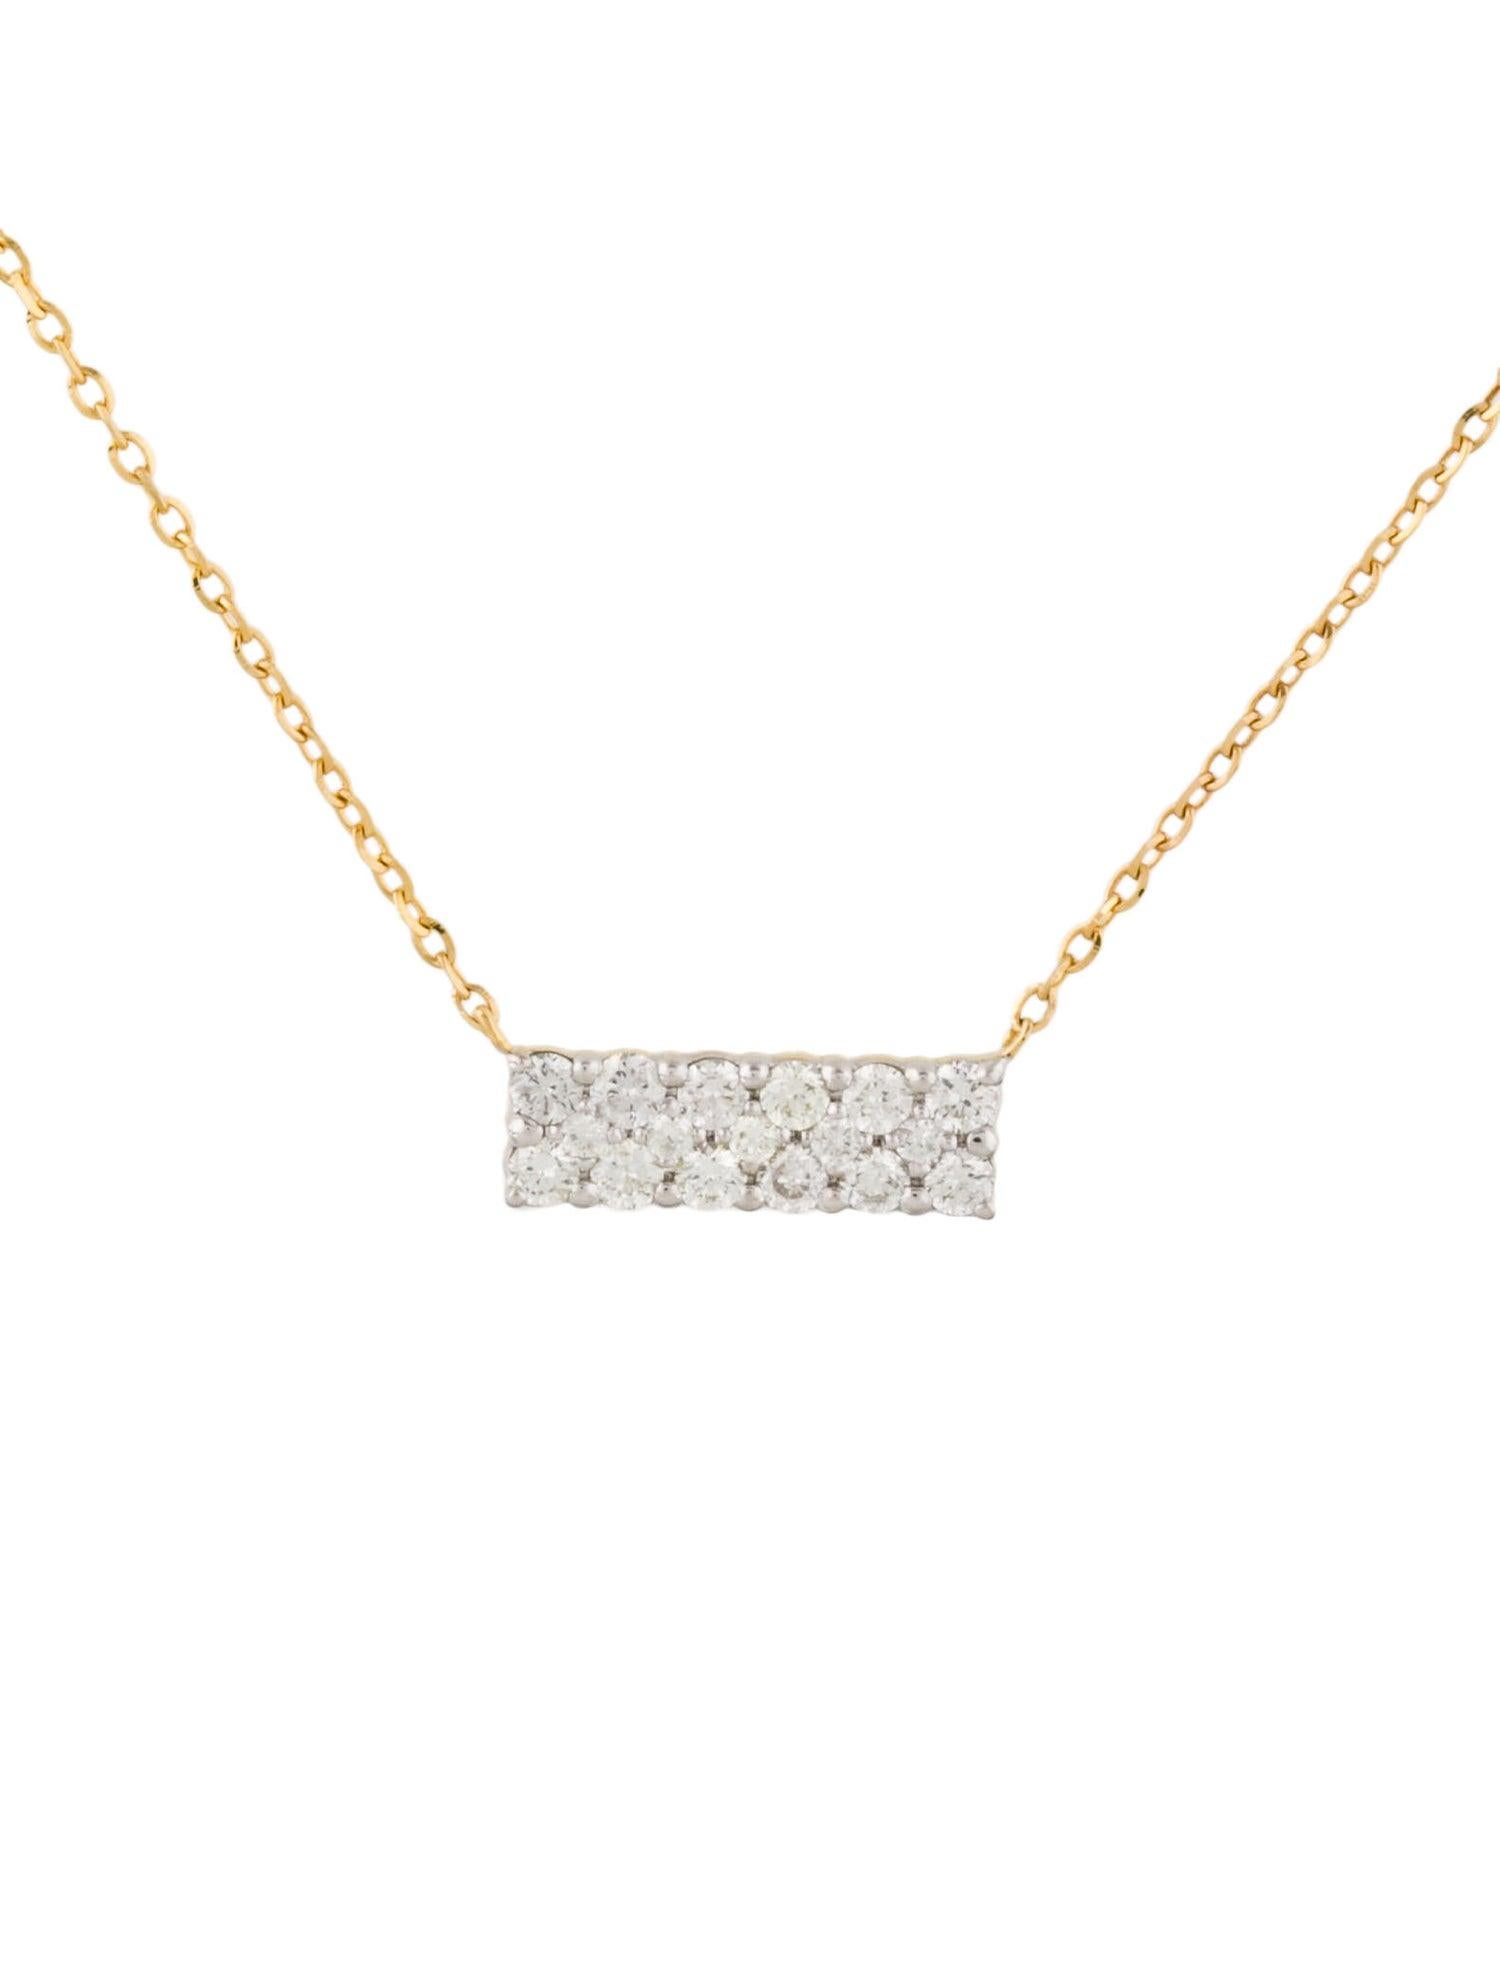 14k Yellow Gold 0.23 Carat Diamond Necklace In New Condition For Sale In Great neck, NY